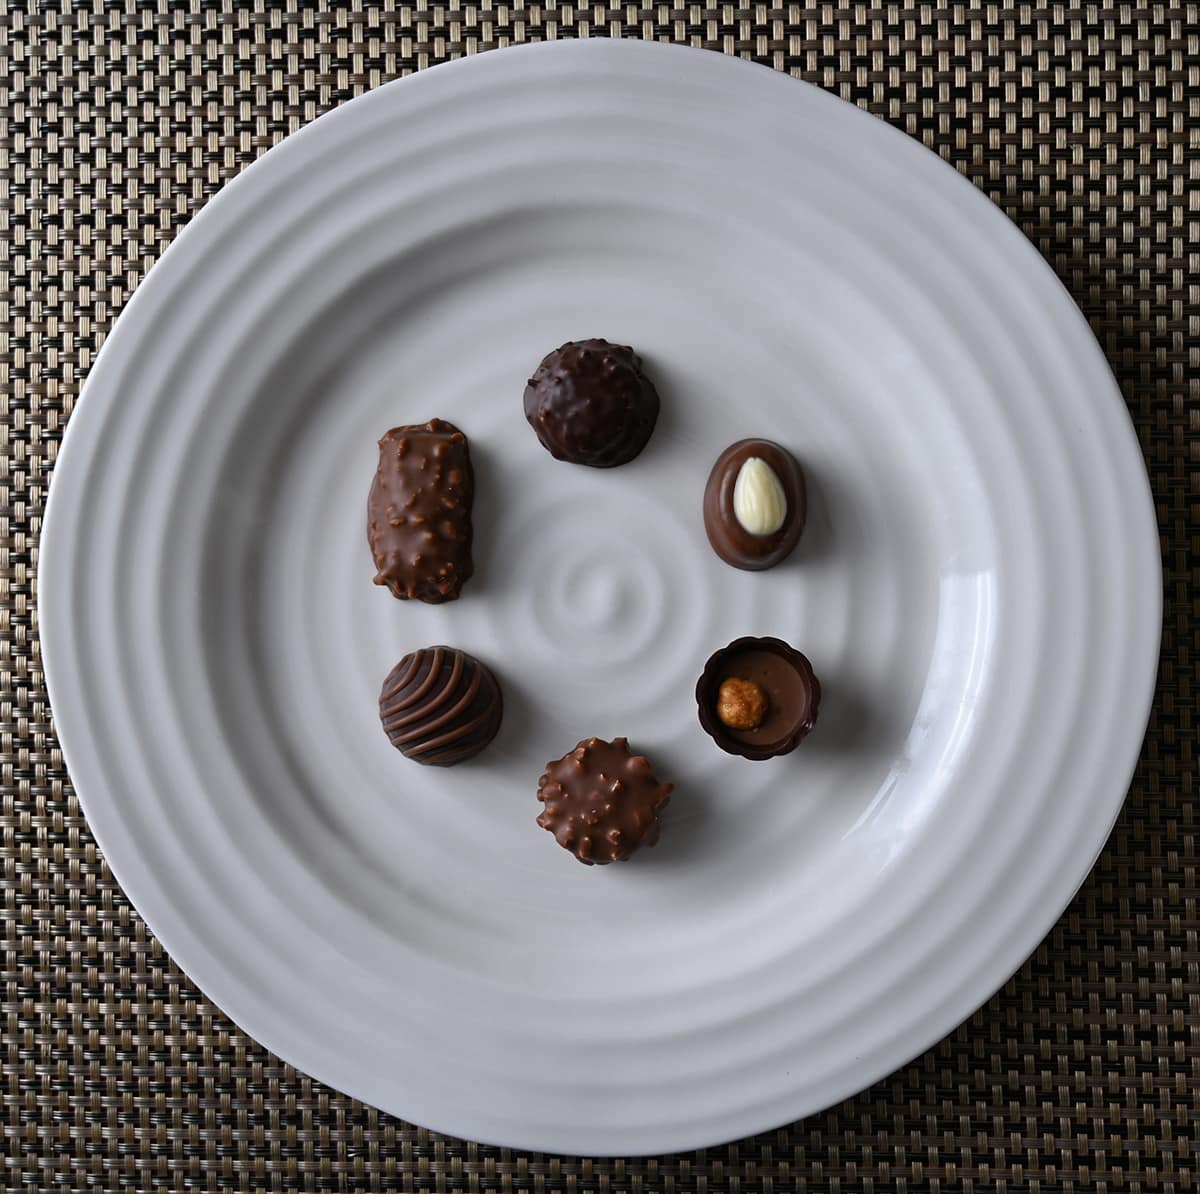 Top down image of a plate with six different kinds of chocolates on it in a circular shape.